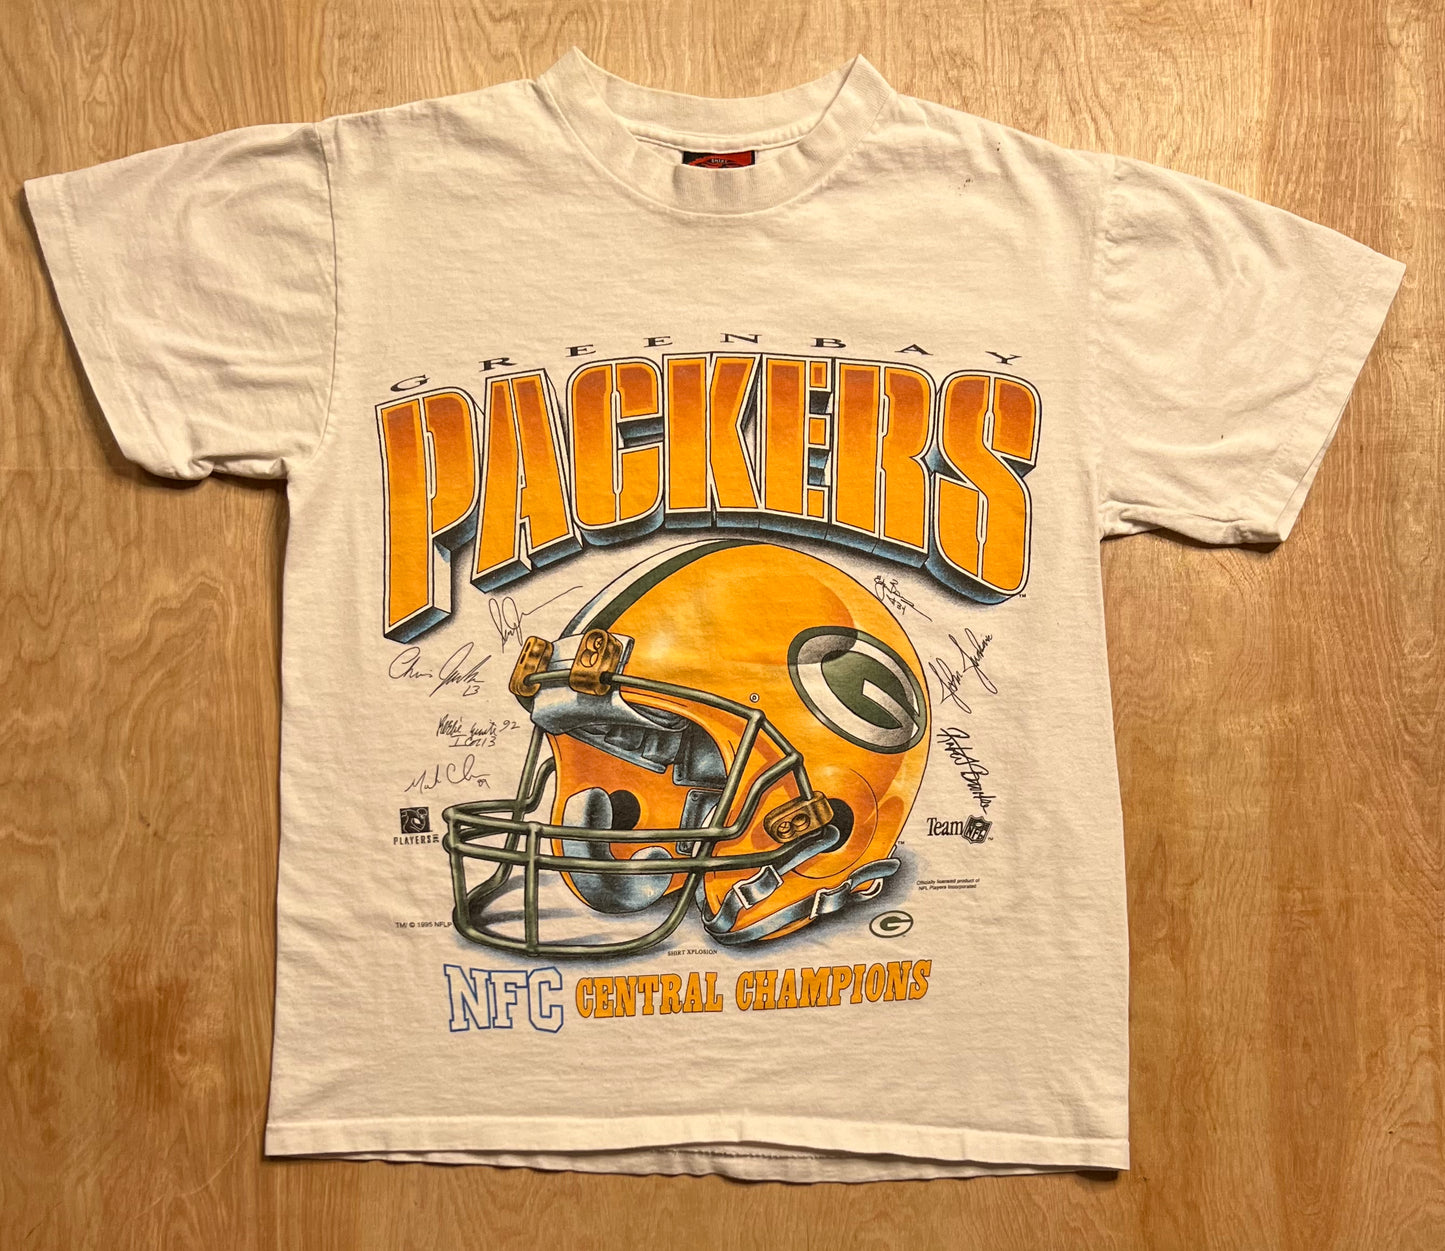 1995 Green Bays Packers NFC Central Champions Helmet x Signatures Single Stitch T-Shirt